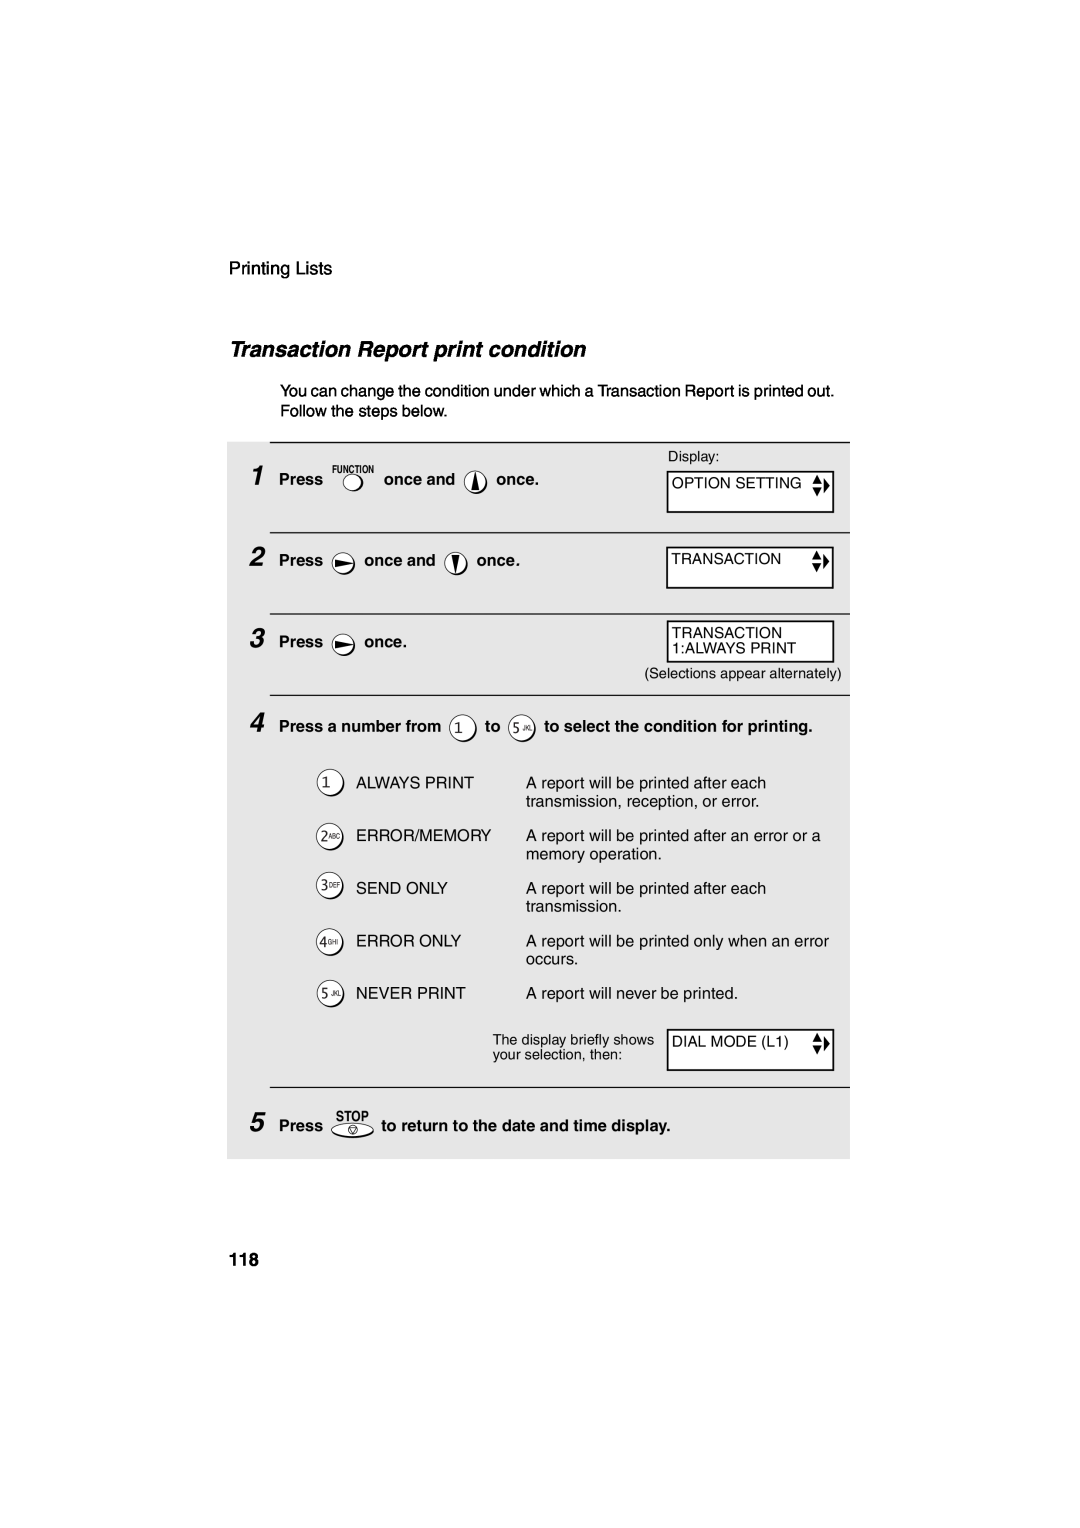 Sharp UX-CD600 operation manual Transaction Report print condition, Selections appear alternately, DIAL MODE L1 